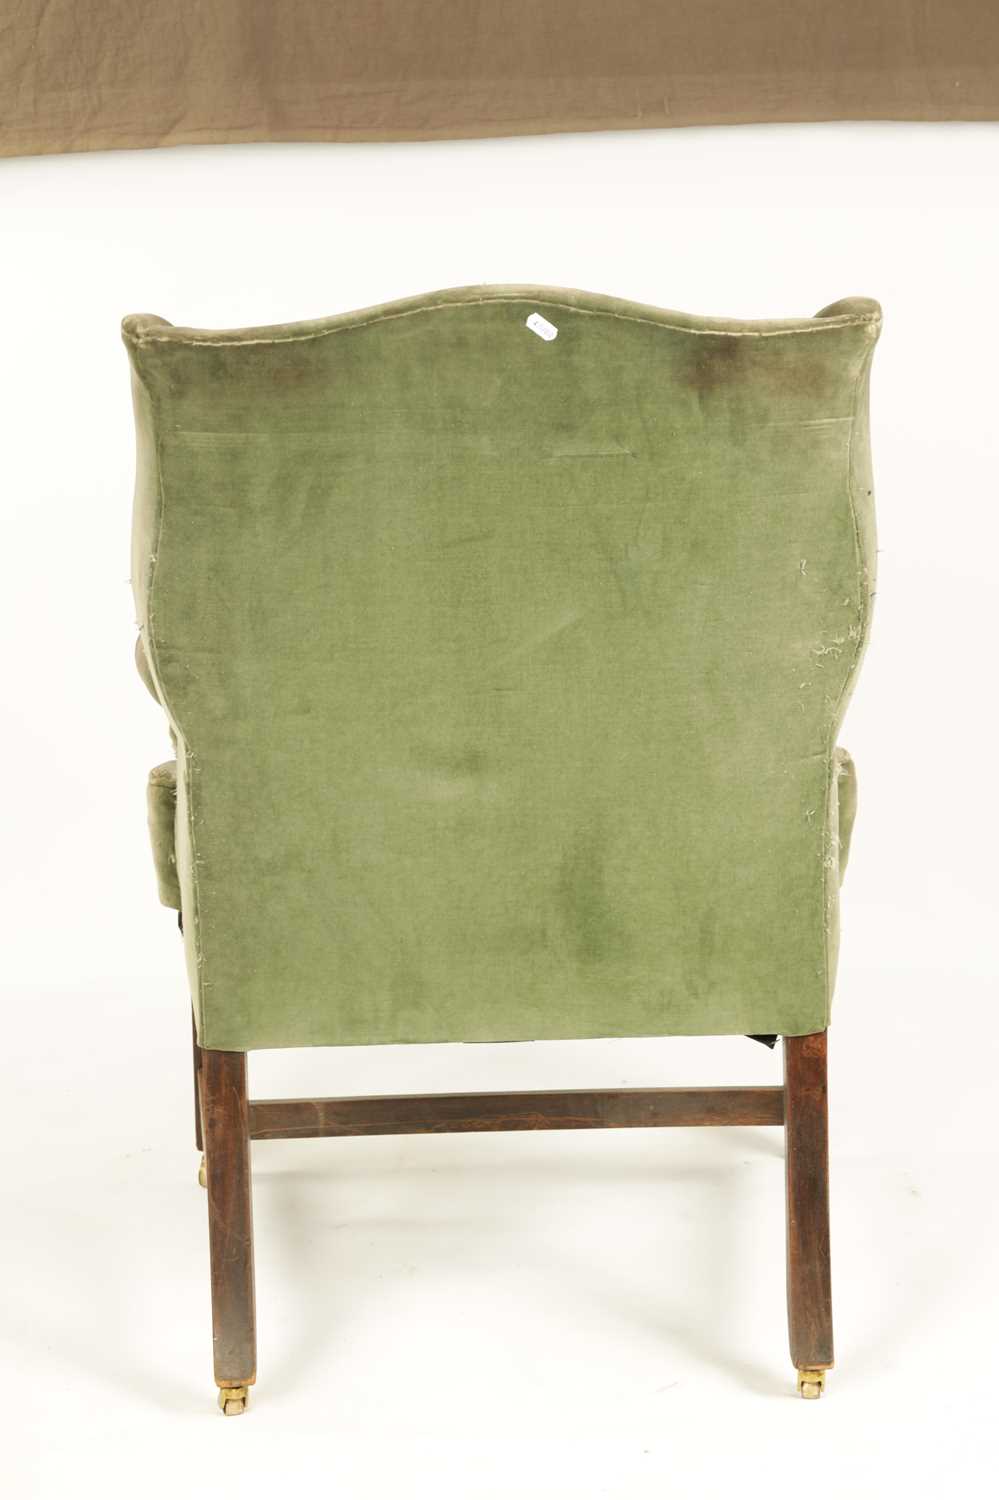 A GEORGE III WING-BACK MAHOGANY FRAMED UPHOLSTERED ARMCHAIR - Image 5 of 5